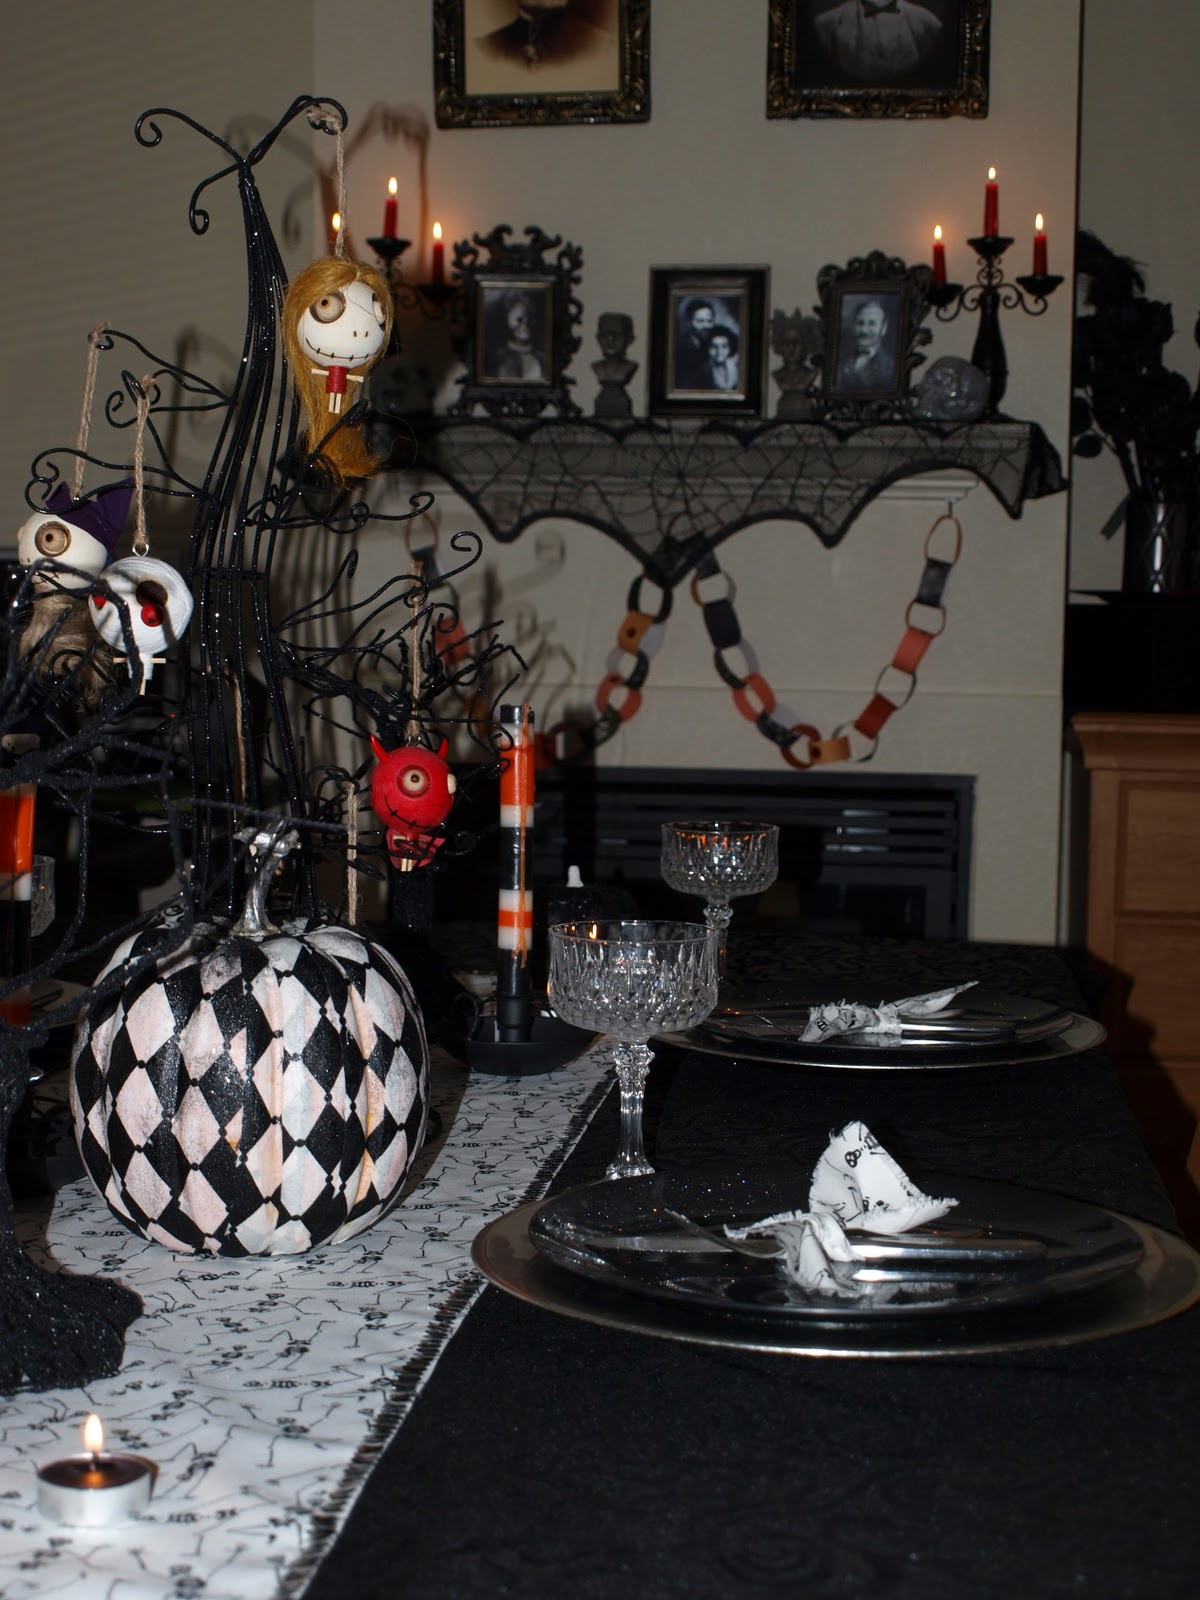 Nightmare Before Christmas Party Food Ideas
 Measurements of Merriment "The Nightmare Before Christmas